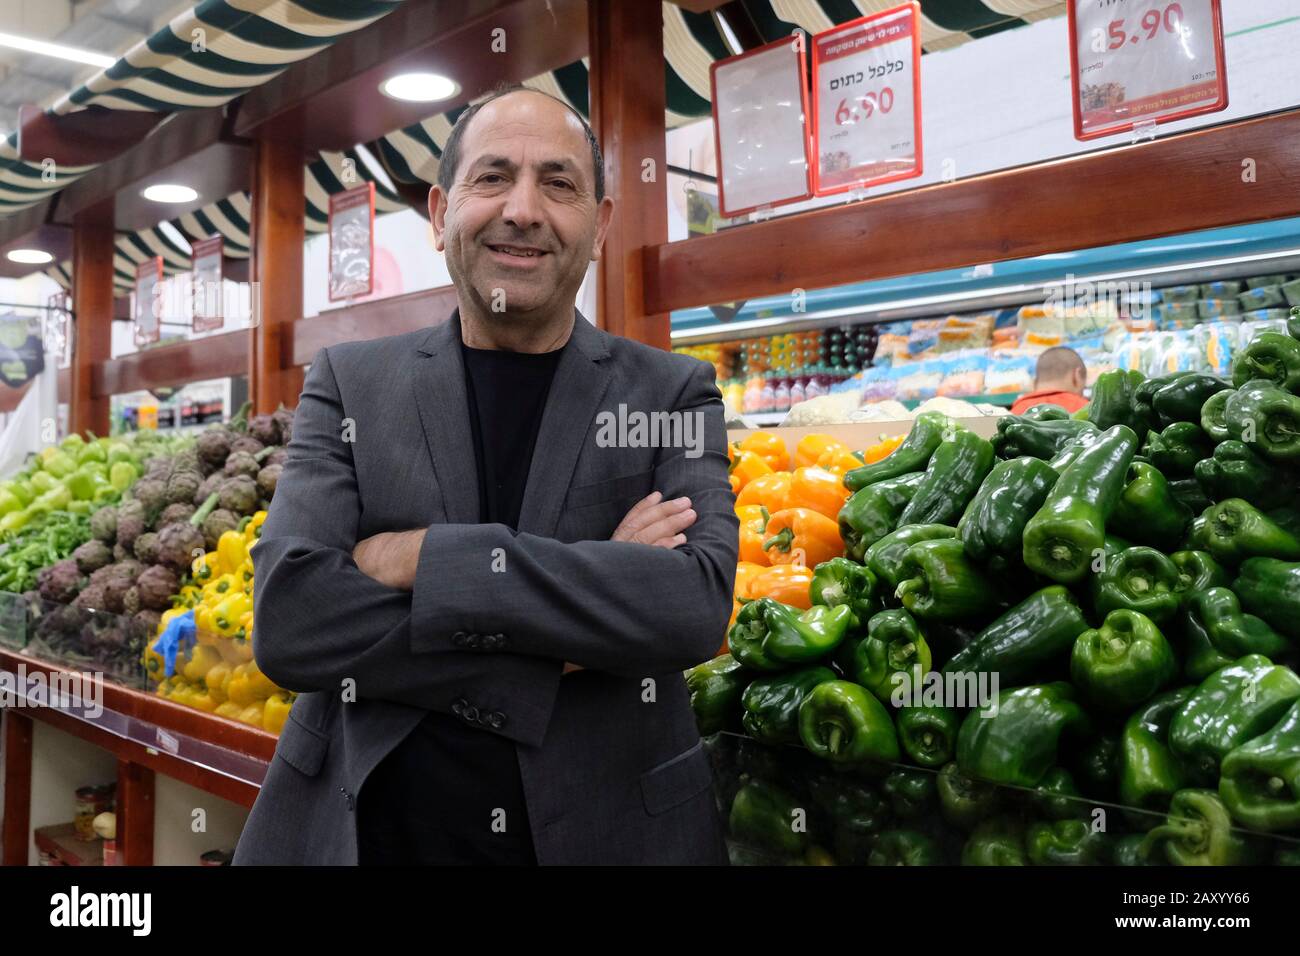 Rami Levy owner of Rami Levy Hashikma Marketing an Israeli retail  supermarket chain that operates throughout Israel, including the West Bank  posing in a branch of Ramy Levy supermarket in Atarot industrial